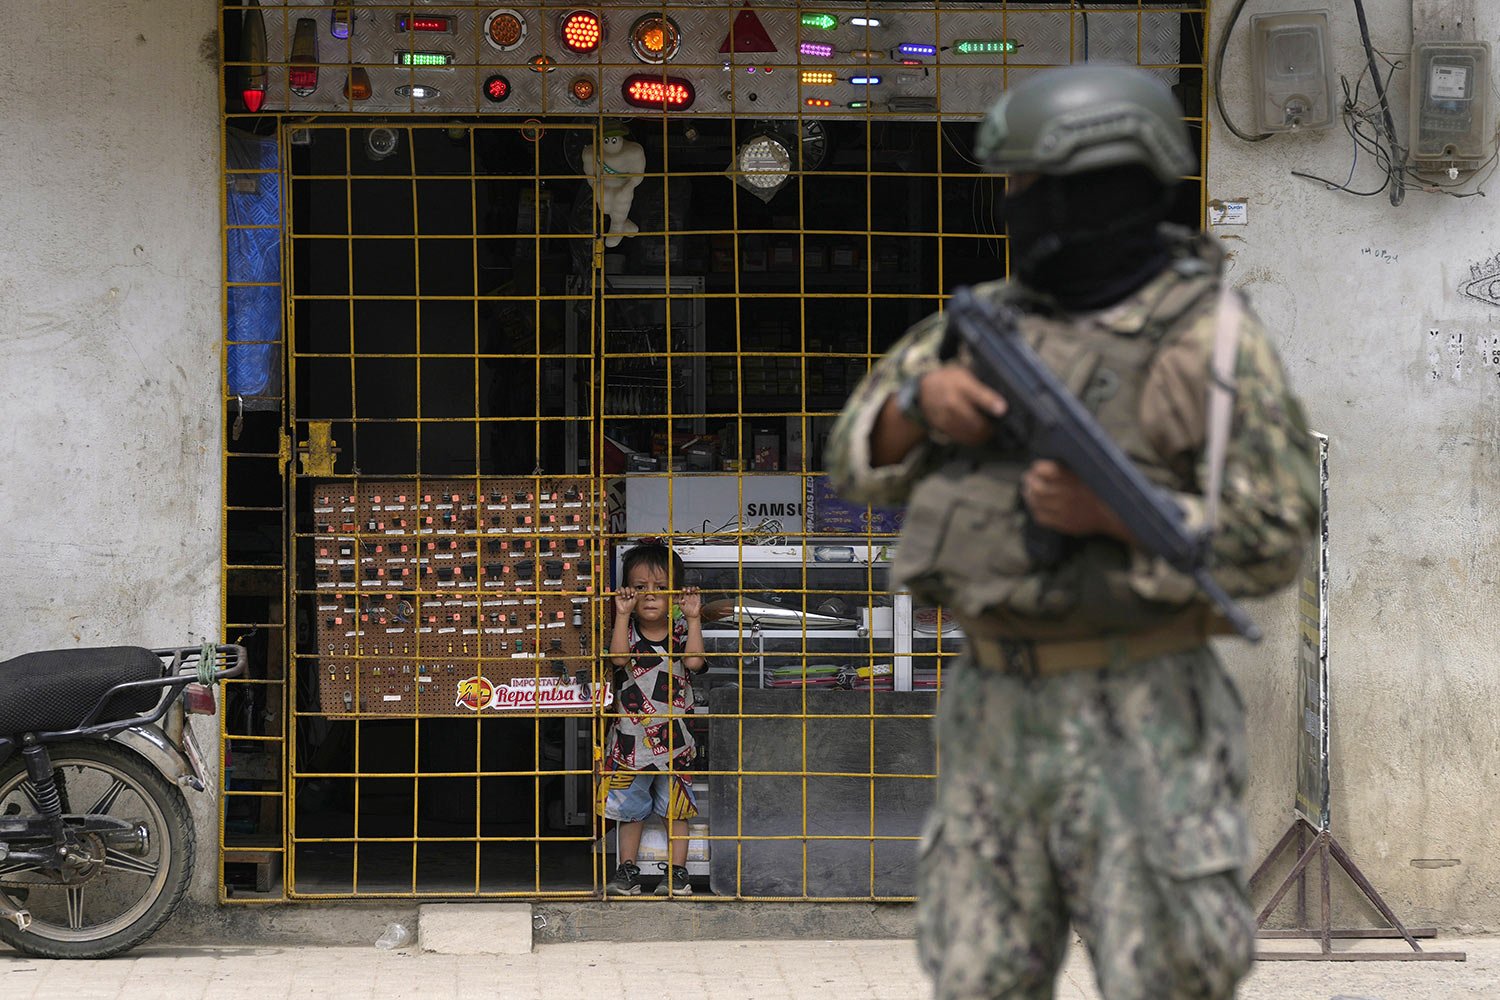  A toddler watches from behind a storefront gate where a soldier stands guard at a security check point in Duran, Ecuador, Aug. 14, 2023, during a state of emergency triggered by the assignation of a presidential candidate. (AP Photo/Martin Mejia) 